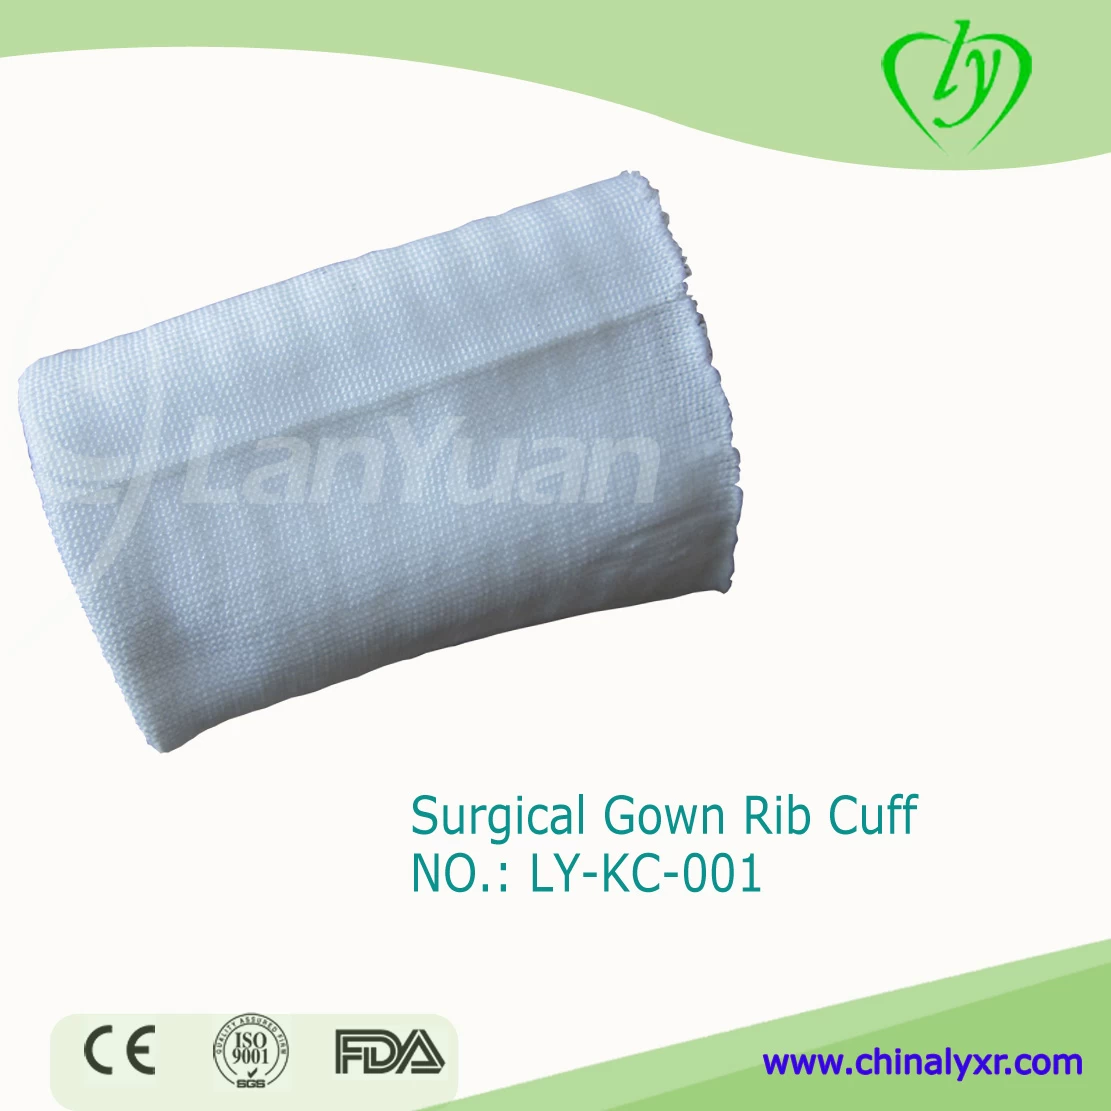 China Surgical Gowns Rib cuff manufacturer